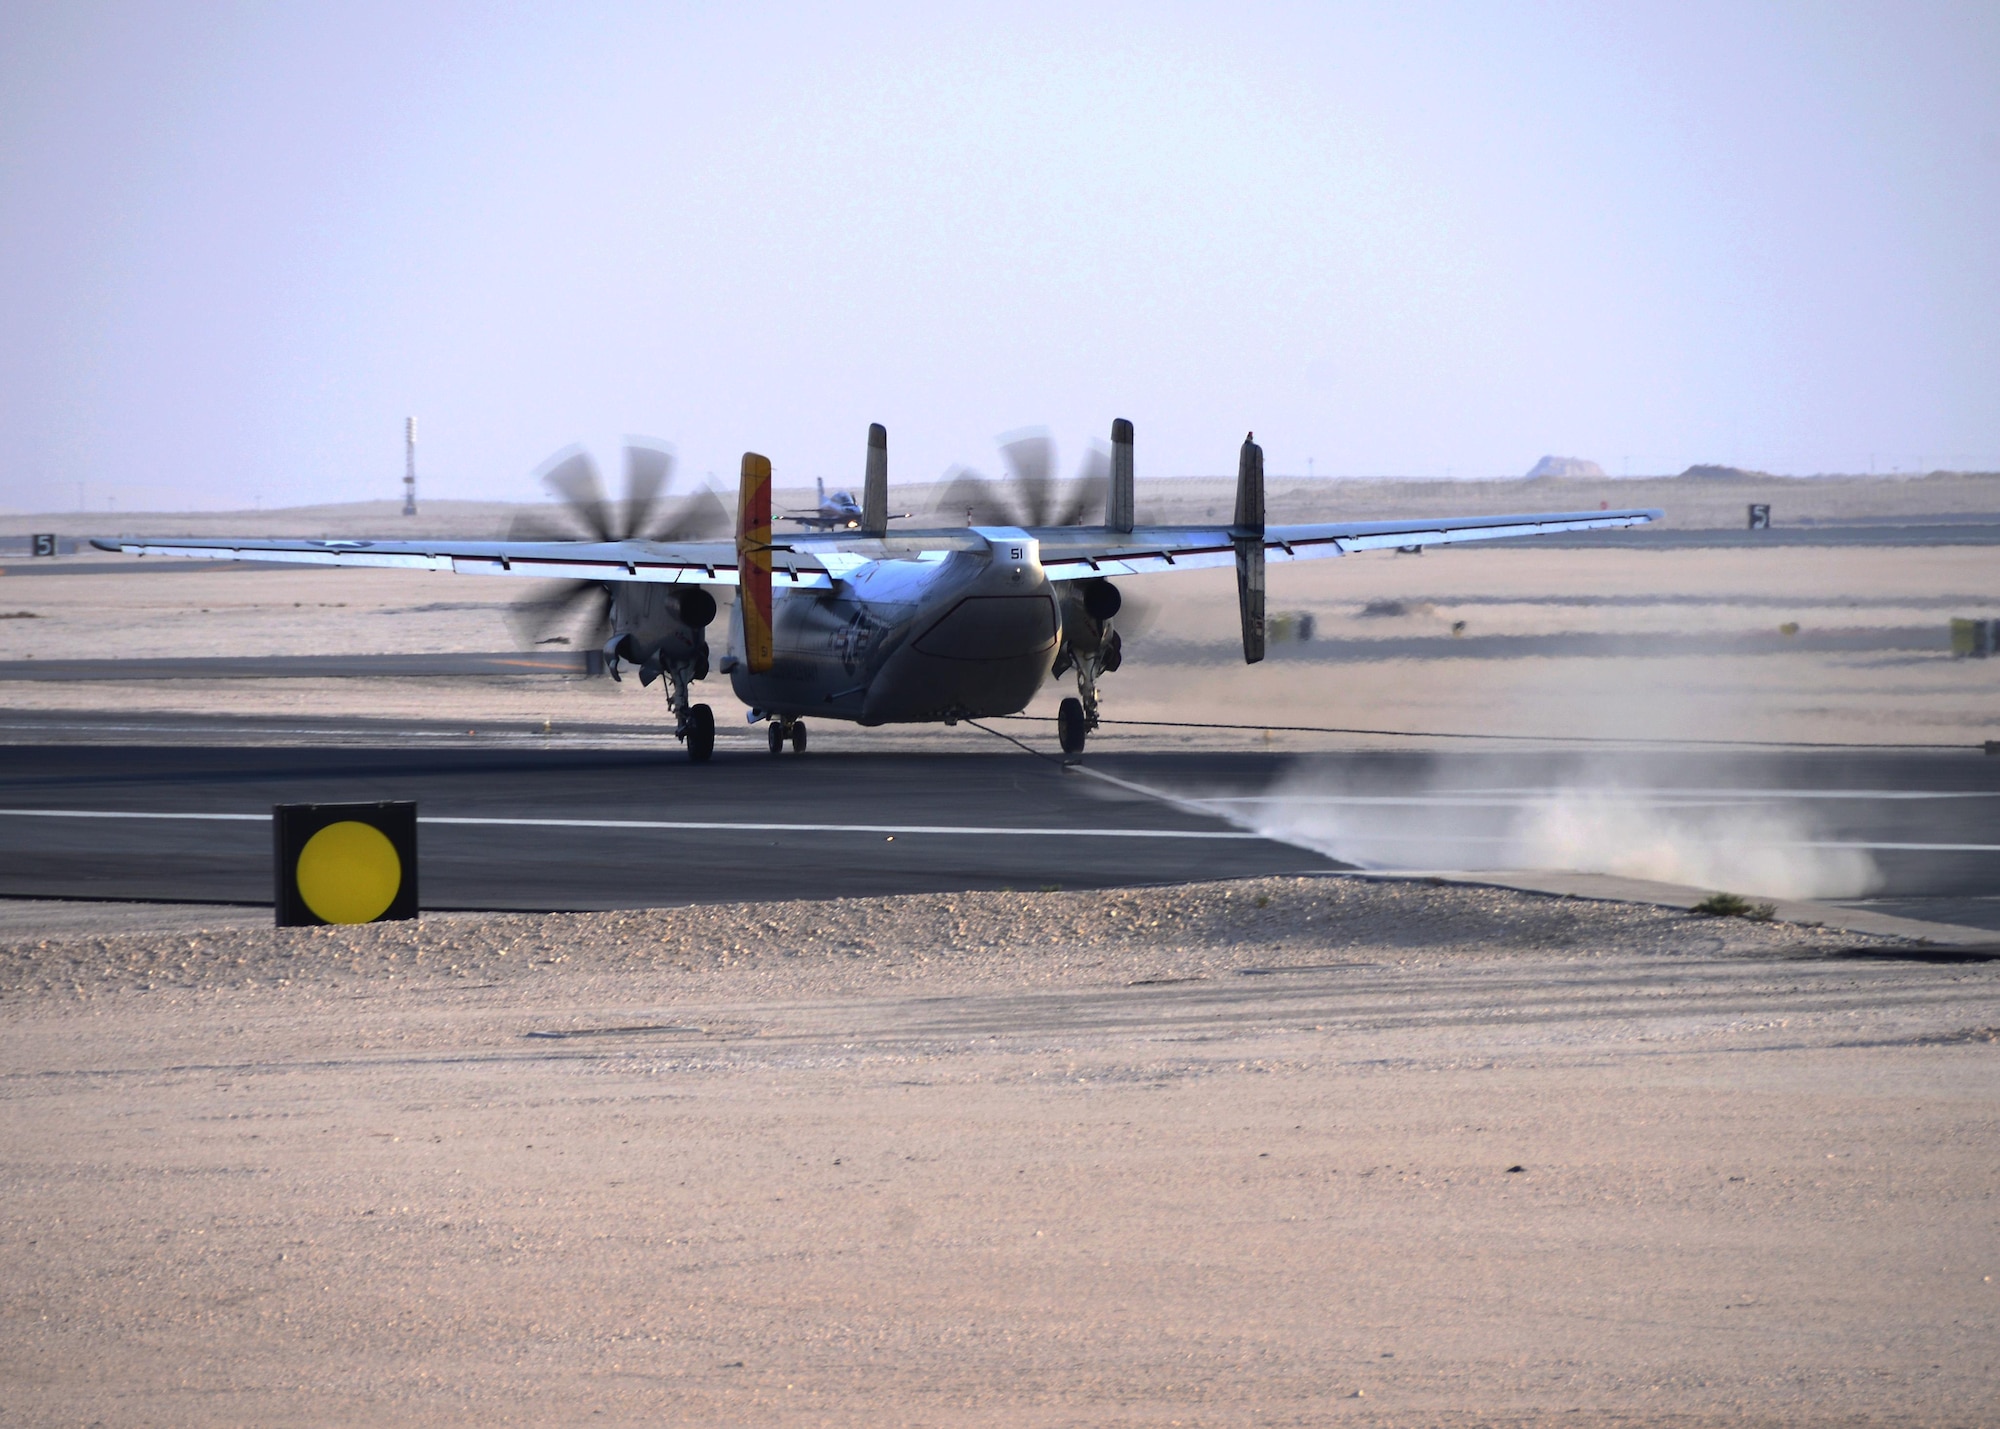 A U.S. Navy C-2A Greyhound tests the Aircraft Arresting System on the flight line Oct. 9, 2016, at Al Udeid Air Base, Qatar. The AAS is used in the event that an emergency stop or landing is needed to prevent potential harm to both pilot and aircraft. The system consists of a cable that runs along the width of the runway, and can be raised and lowered by the barrier arresting kit known as the BAK-14. (U.S. Air Force photo/Senior Airman Miles Wilson/Released)